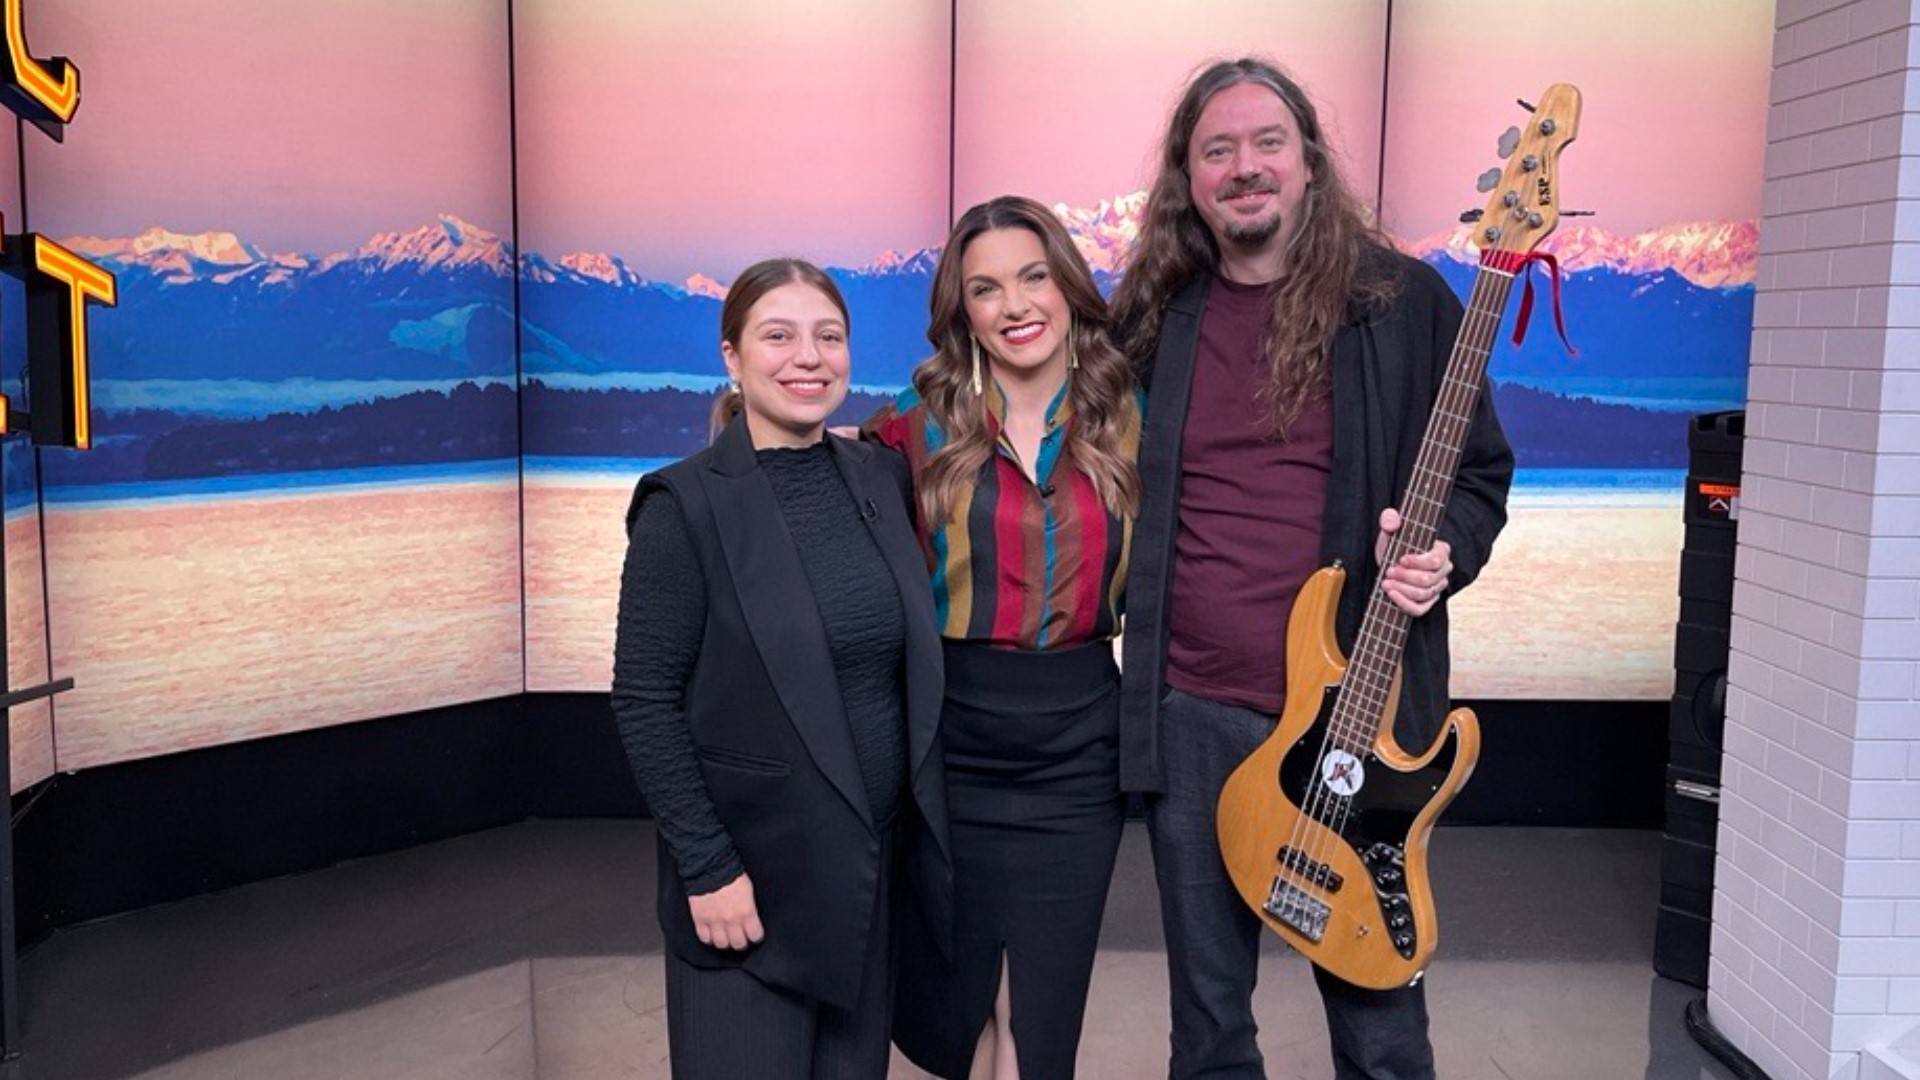 Dalia Stasevska talks about her return as a guest conductor at the Seattle Symphony this weekend along with her husband Lauri Porra who composed music in the program